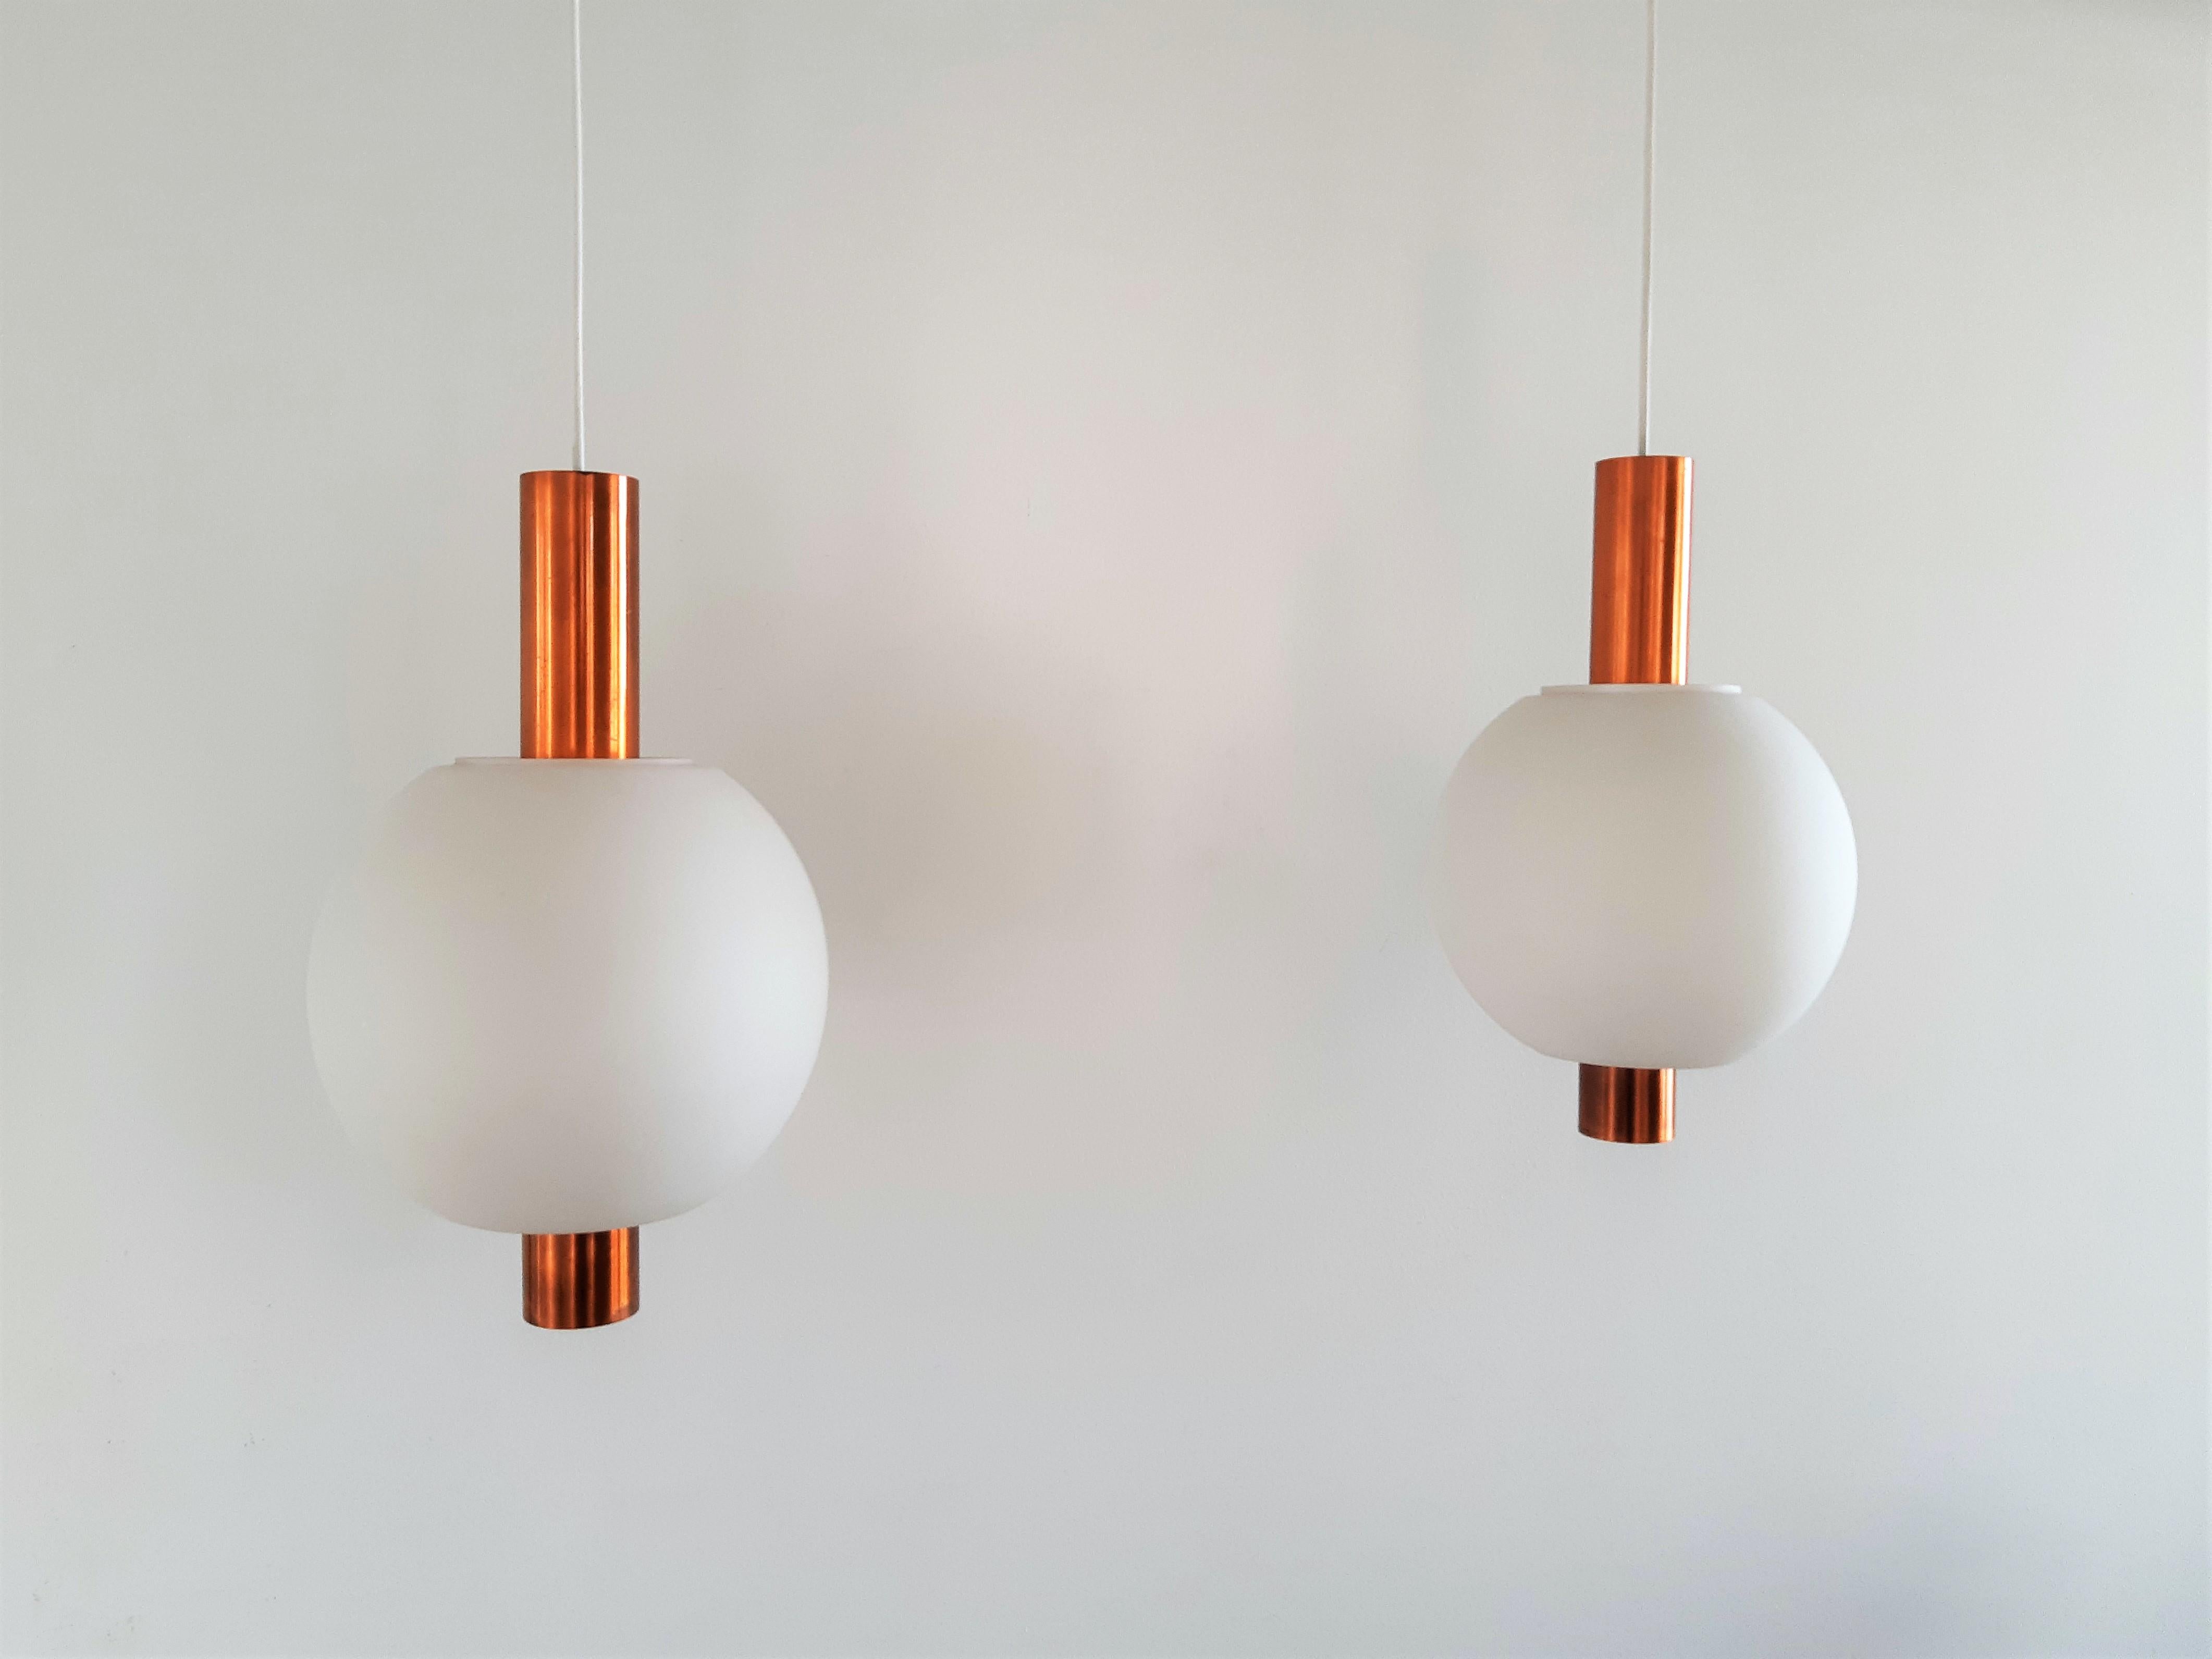 This beautiful and rare pendant lamp, model HL 7362, was made by Hiemstra Evolux. The lamp consists out of an opaline glass shell hanging on a copper shaft. It gives a very warm light due to the materials and color and it can add the finishing touch